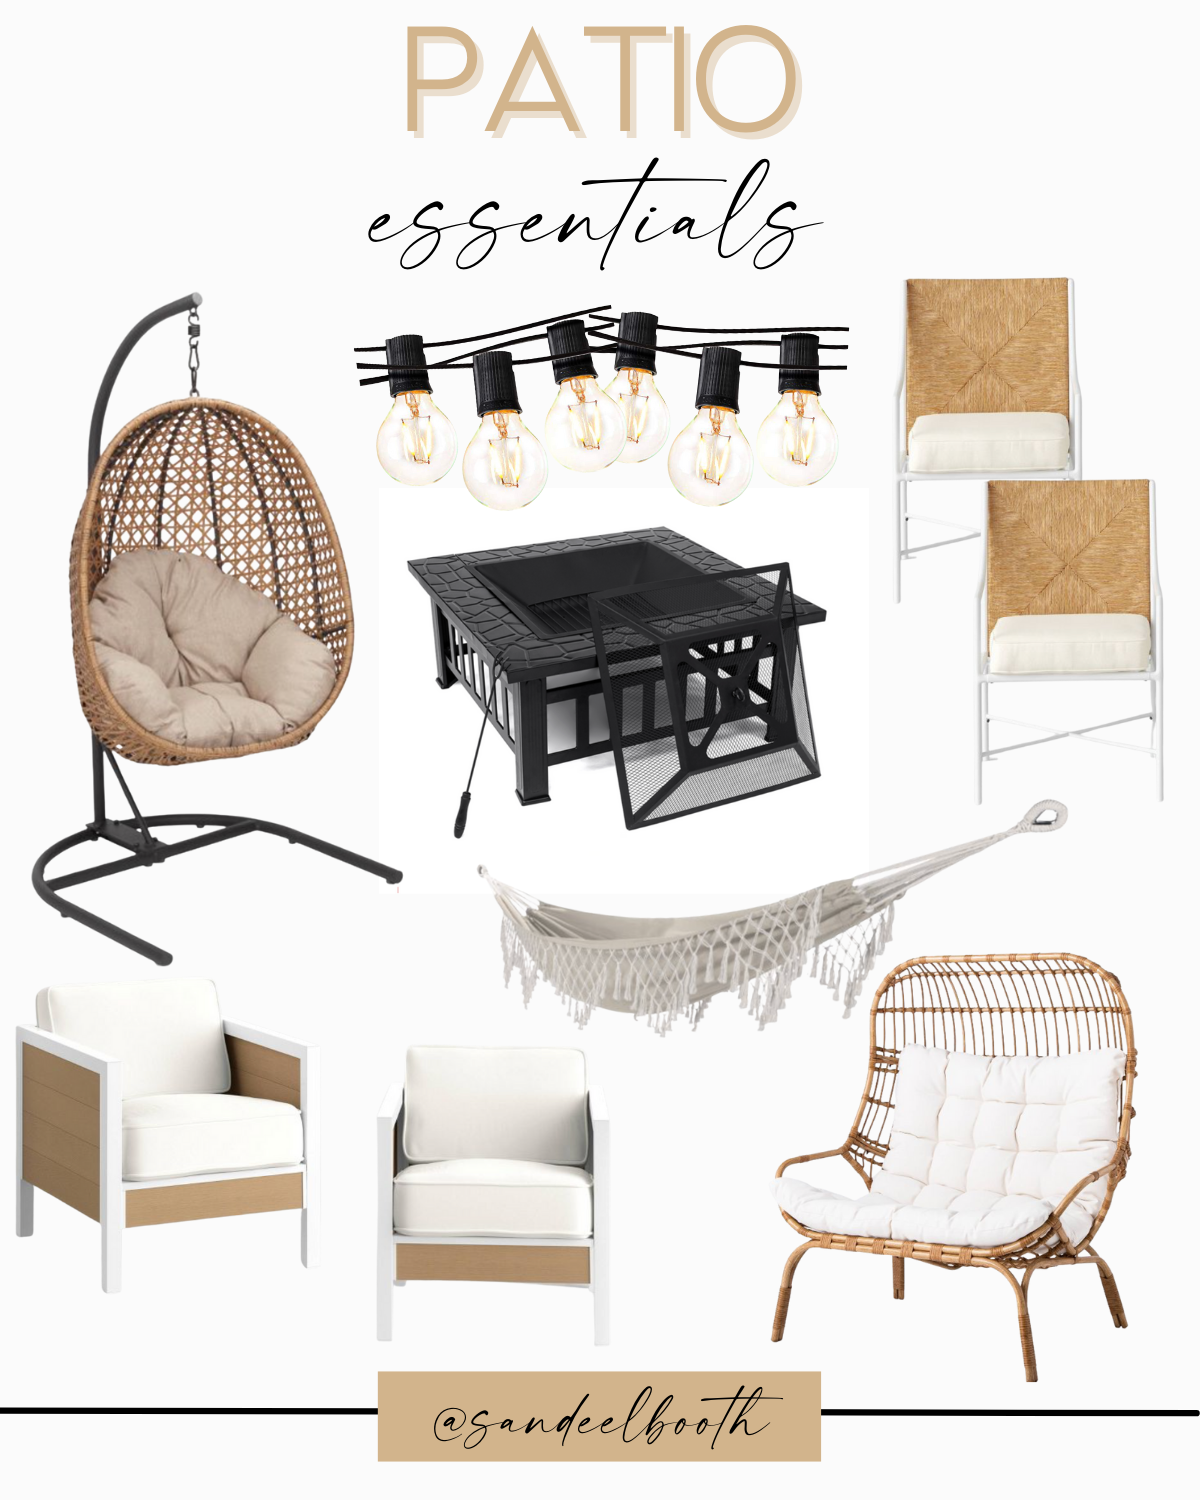 patio essentials: lighting, chairs, seating, hammock, egg chair